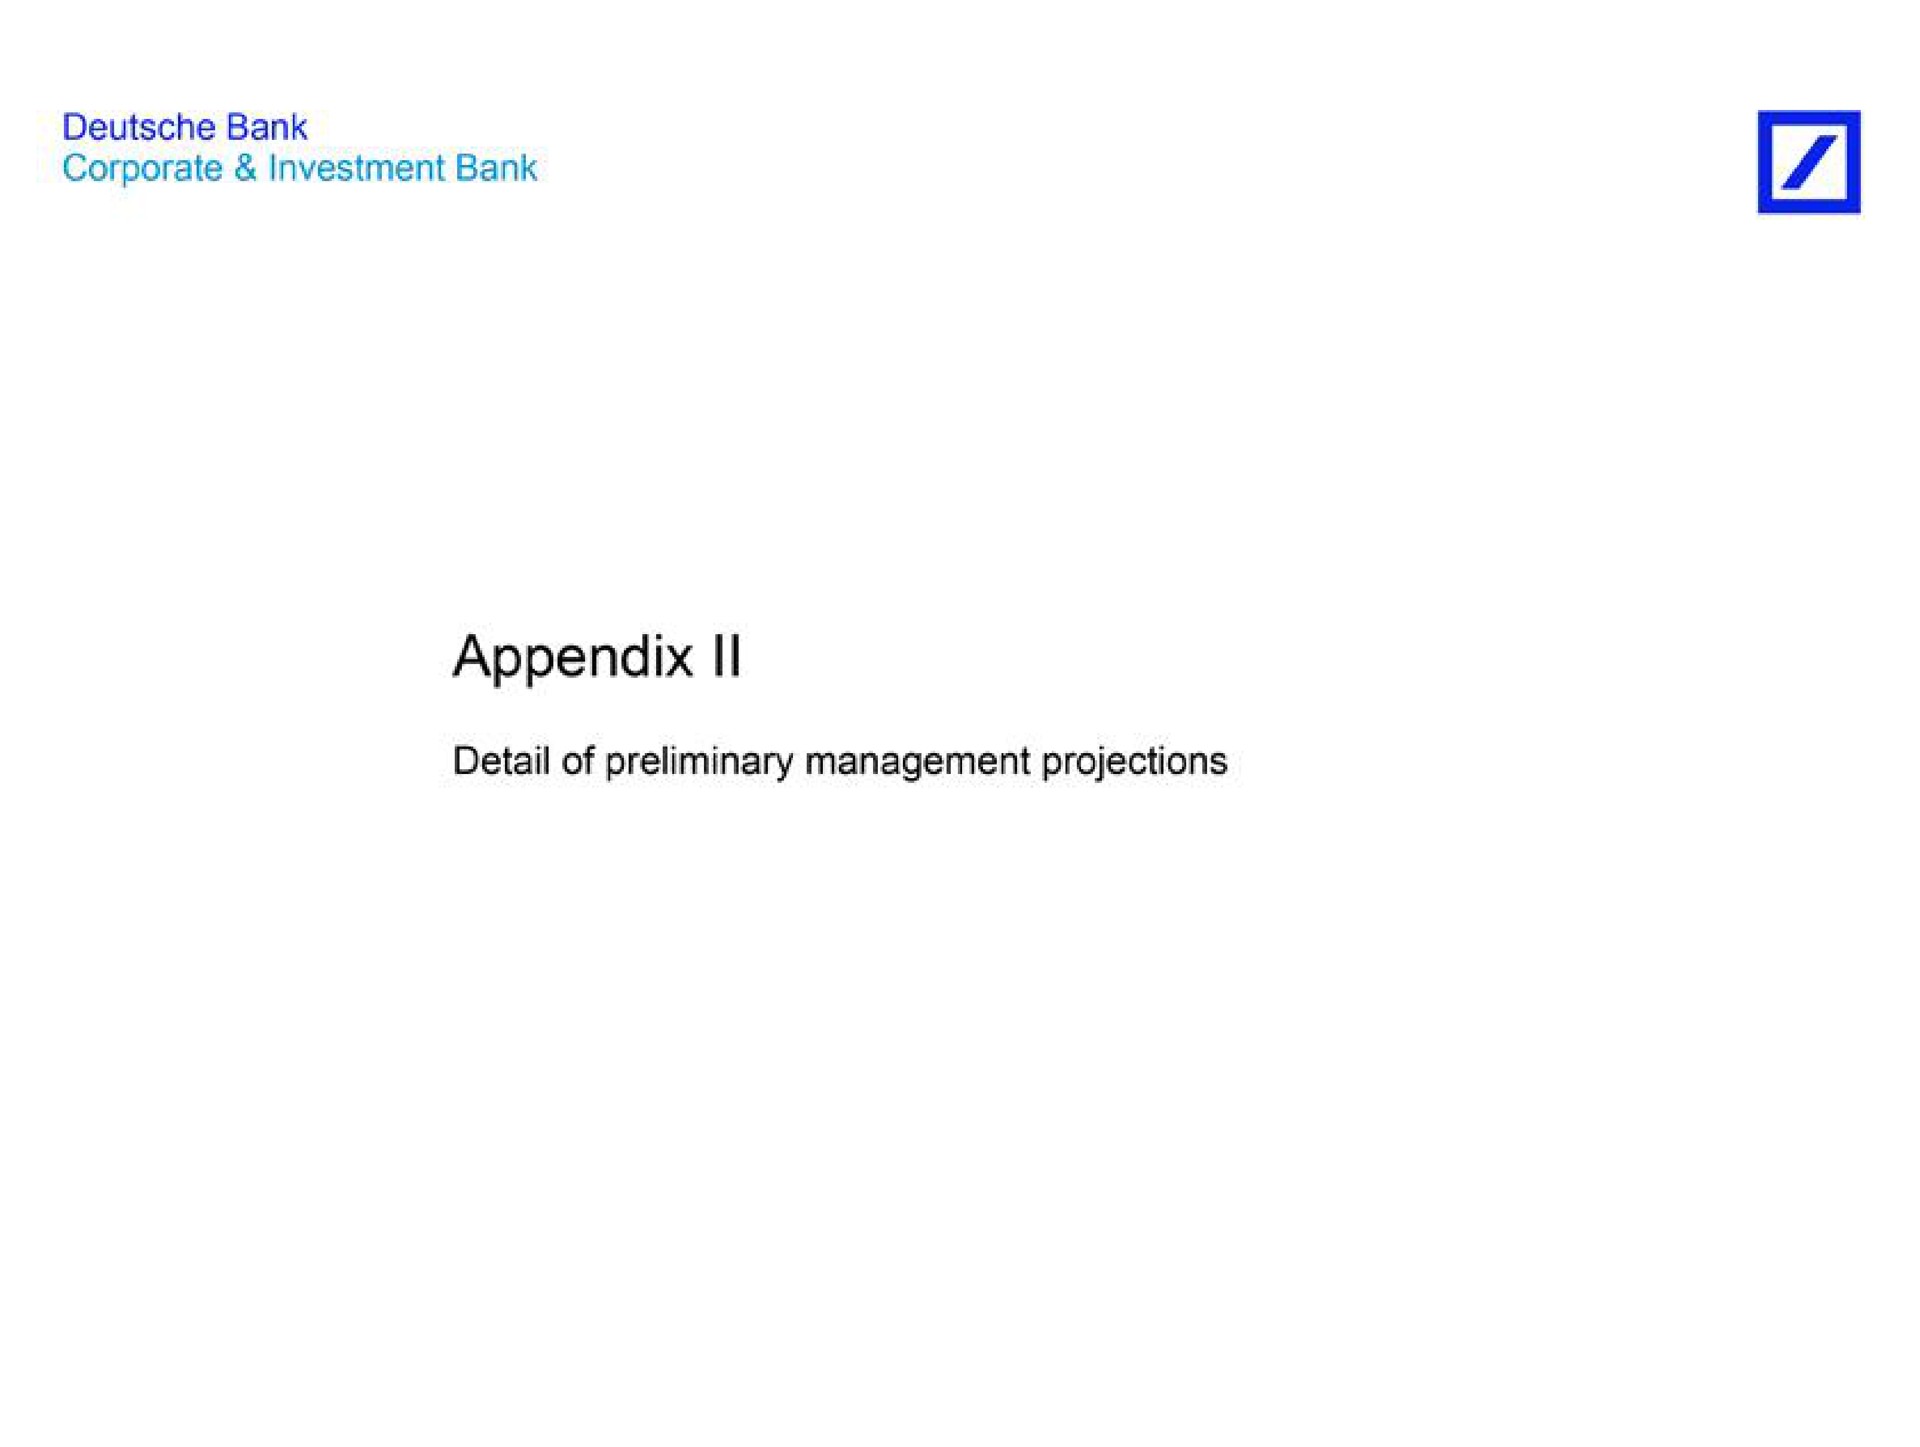 corporate investment bank appendix i detail of preliminary management projections | Deutsche Bank